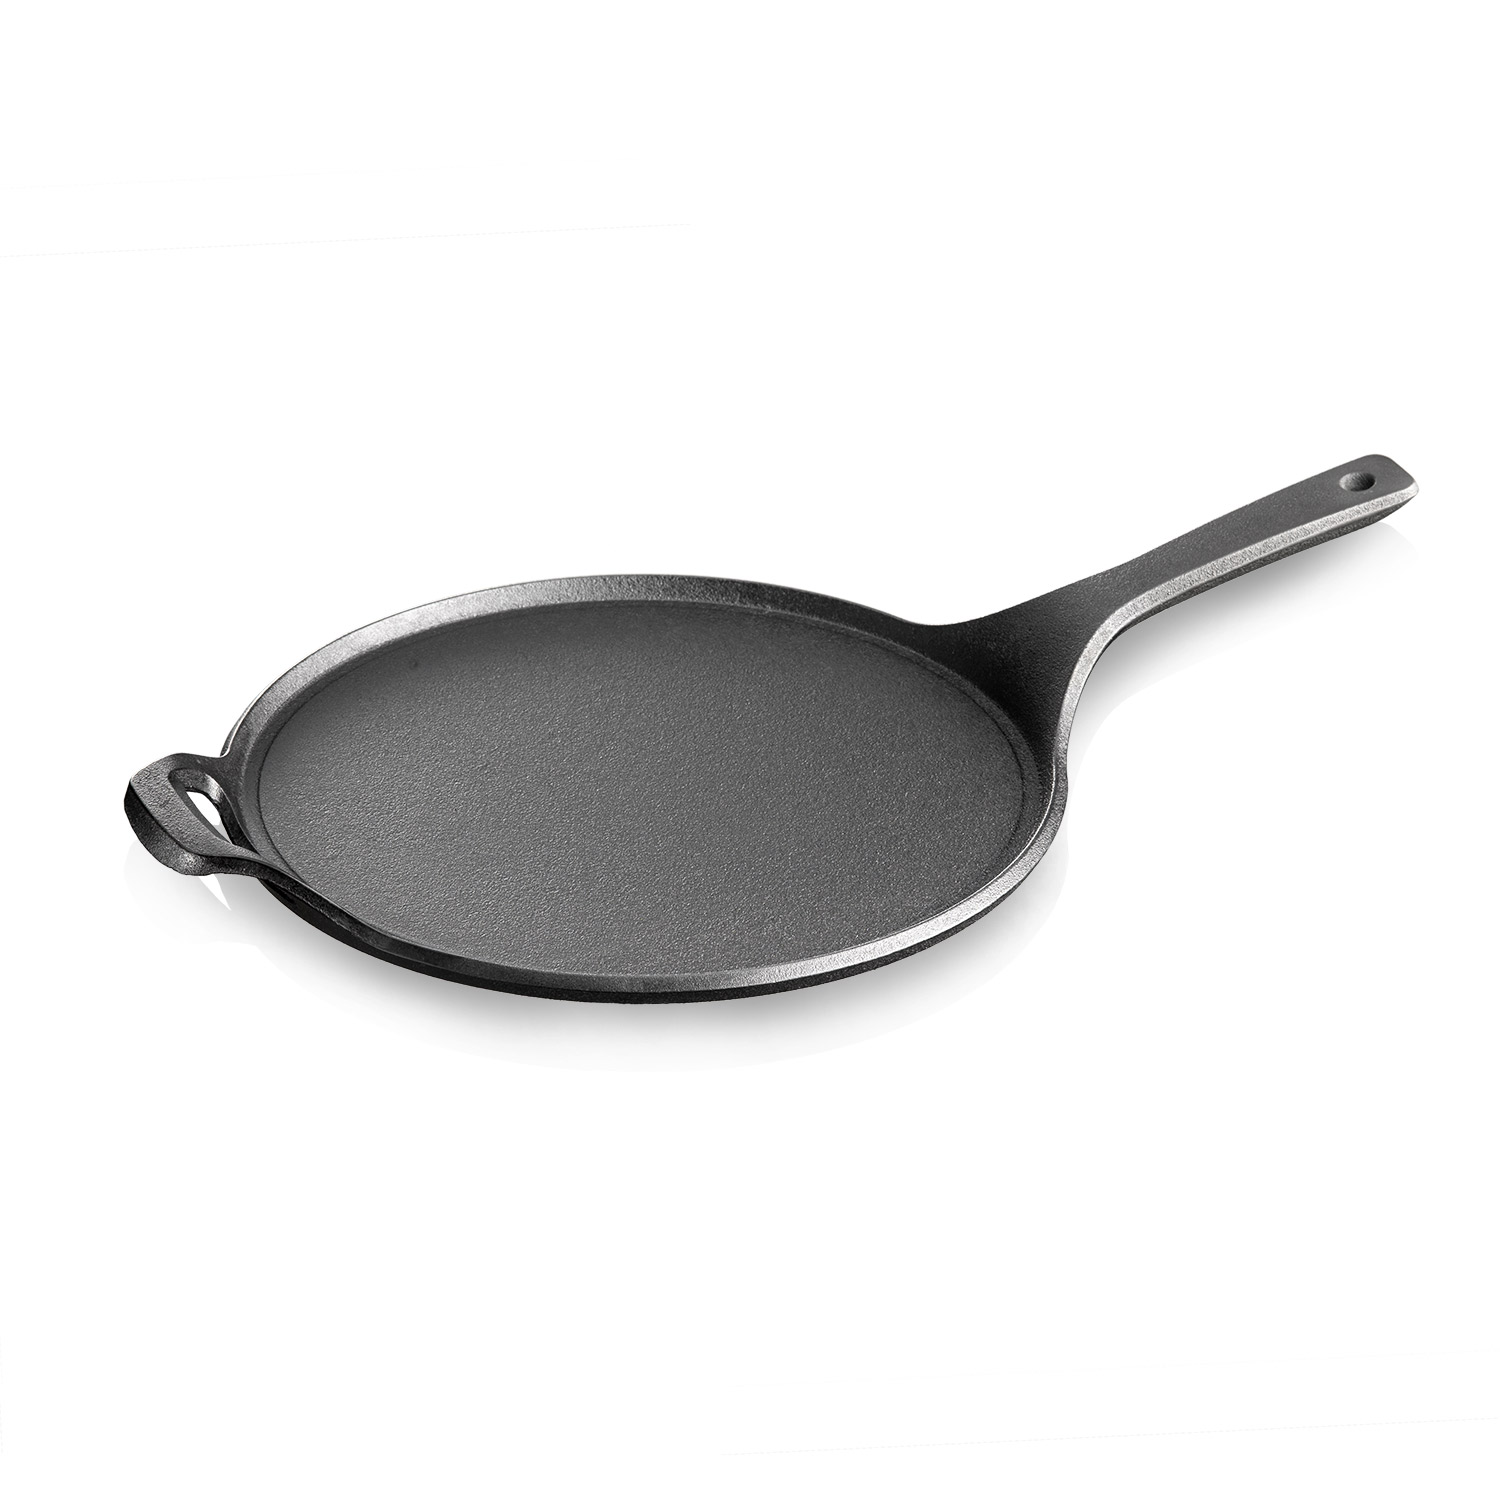 Naked Cast Iron Grill Pan for Piadine - Ghisanativa